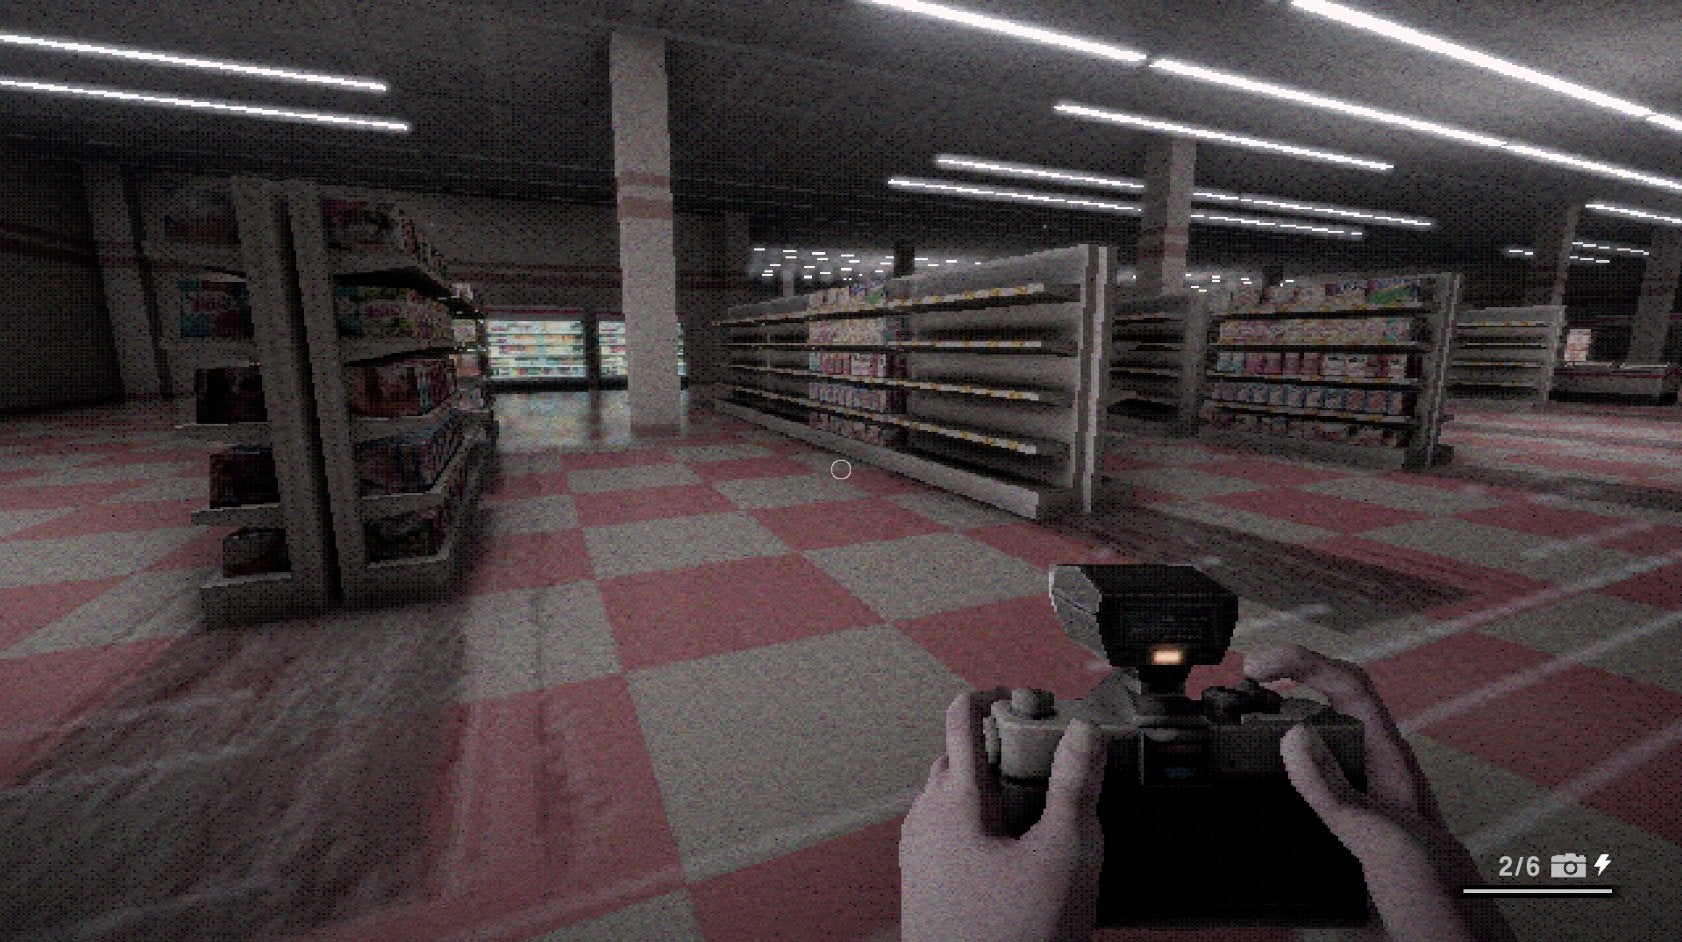 Holding a camera in a spooky supermarket in a game by Sodaraptor.